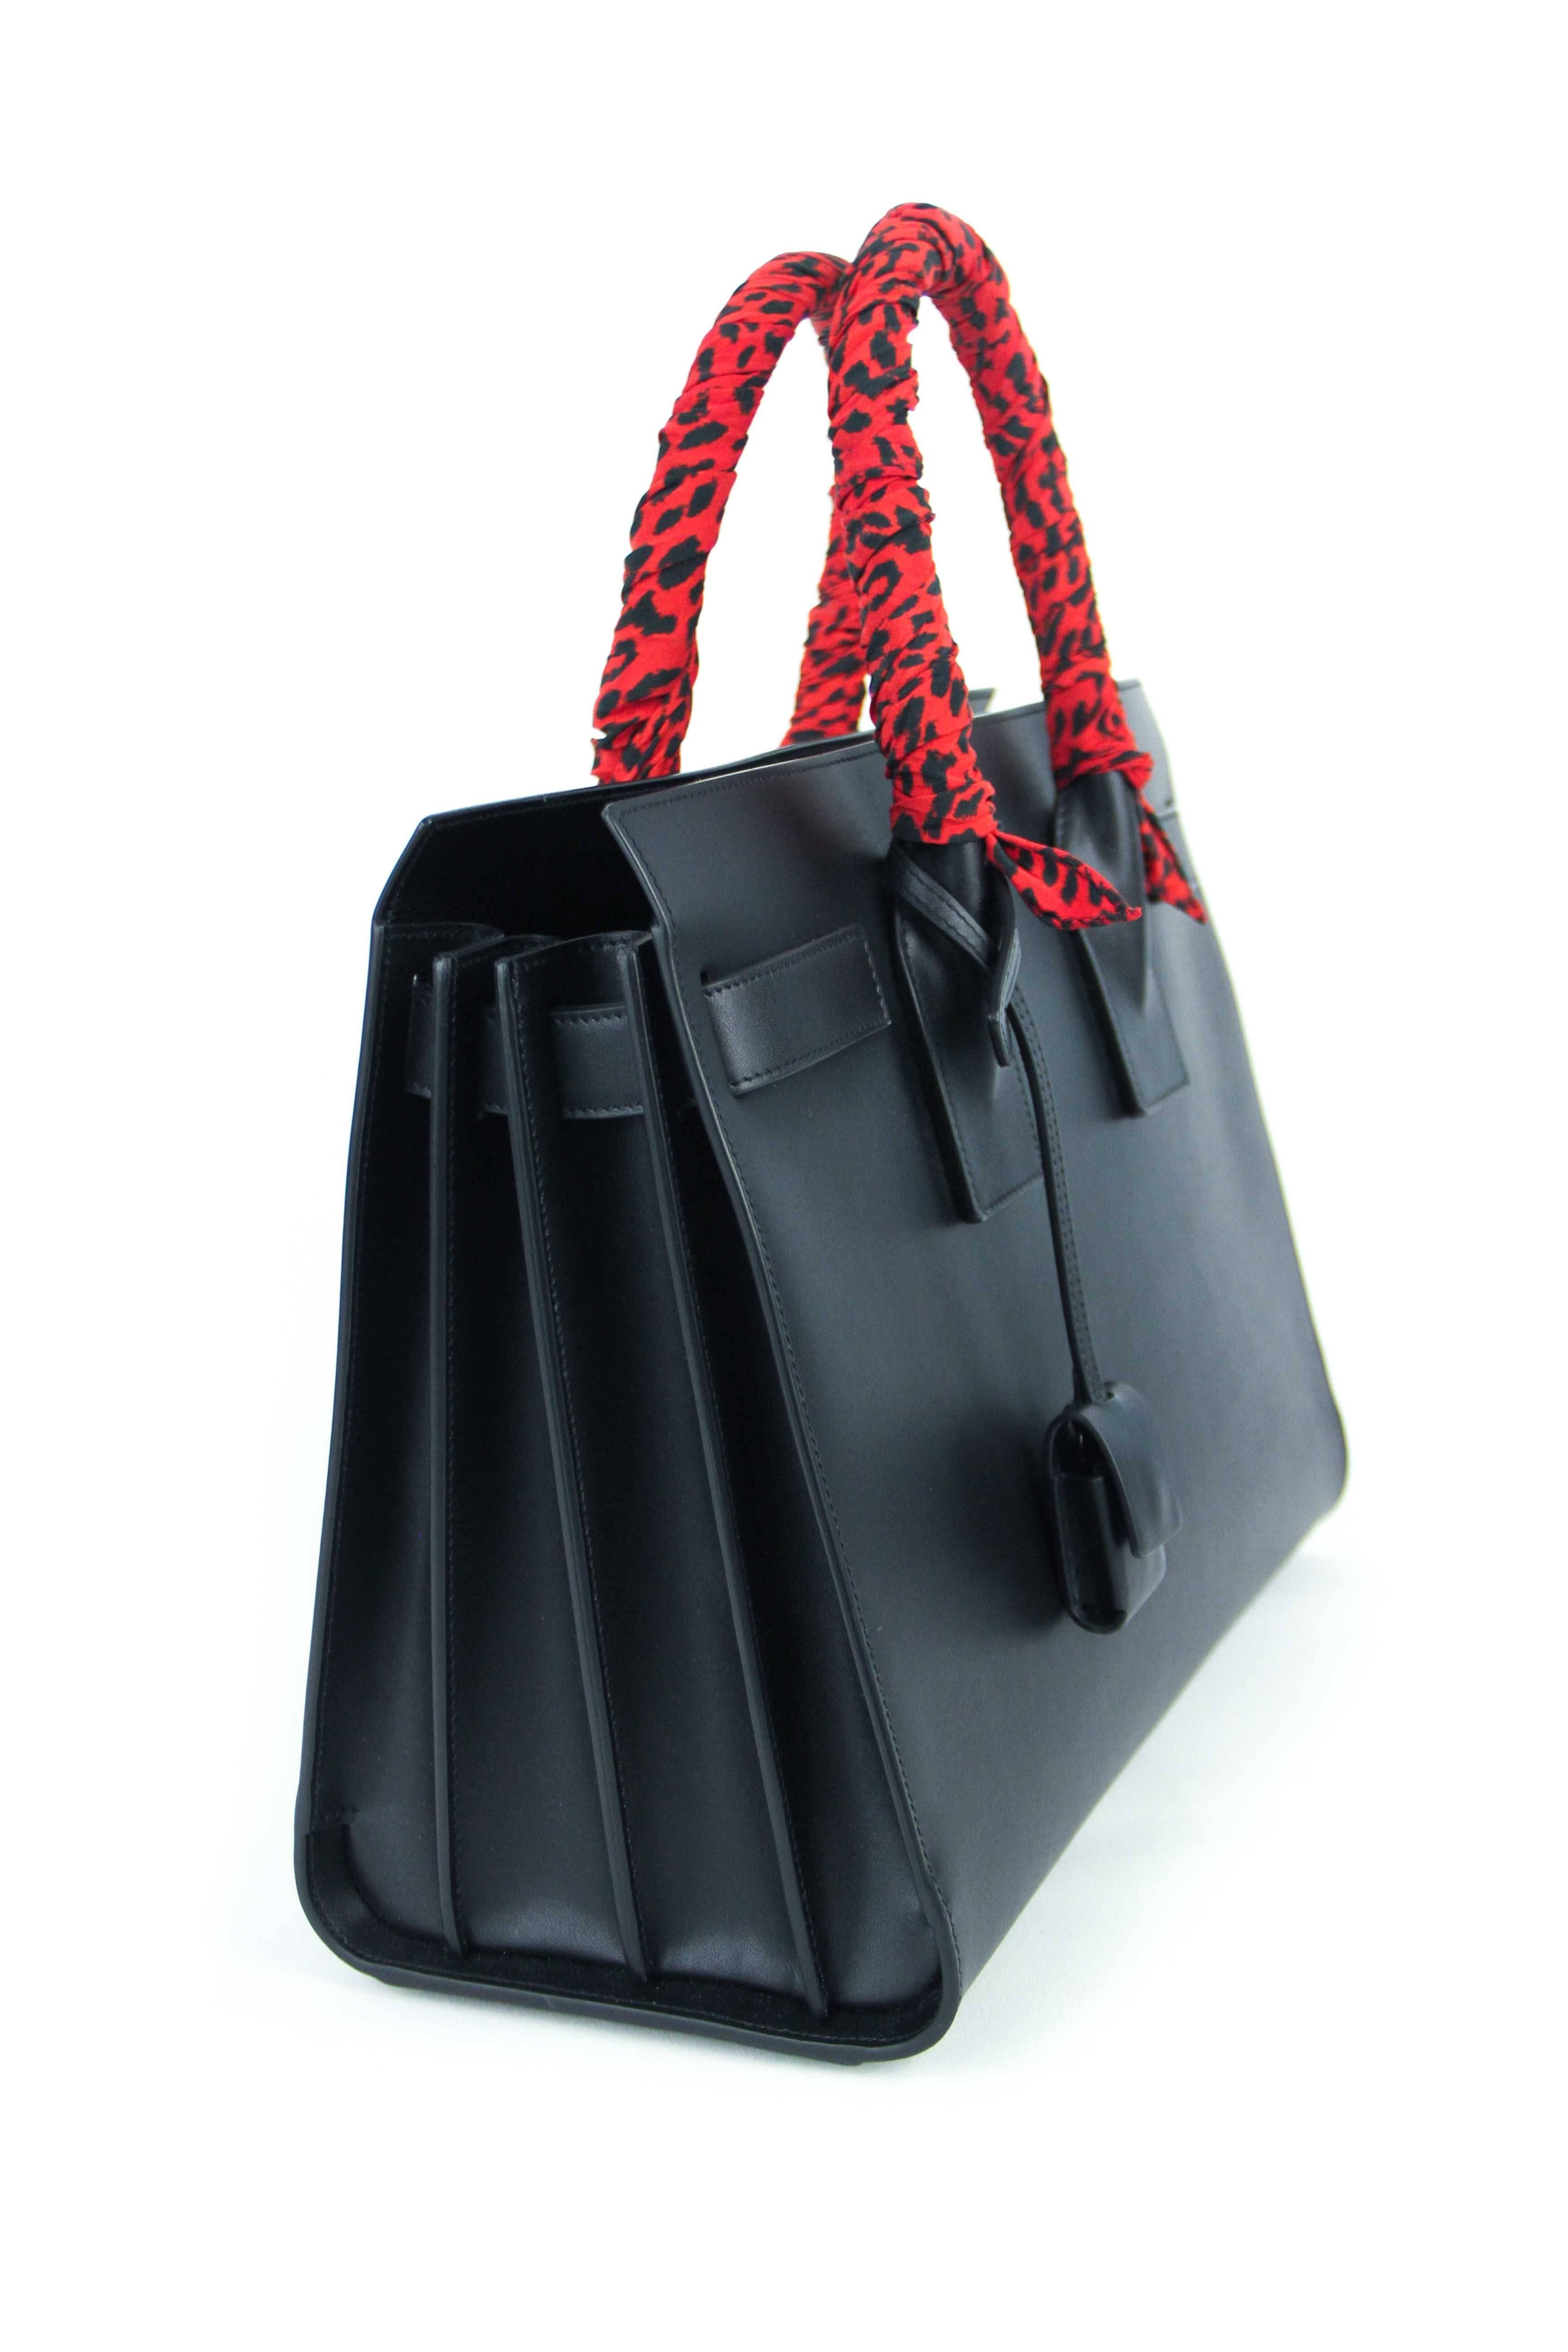 Offered is a pre-owned never used small black Sac De Jour from Saint Laurent.
Babycat printed scarf wrapped handles in black and red. Smooth calfskin with black-tone hardware.  Comes with original tags and dustbag. Features an adjustable detachable